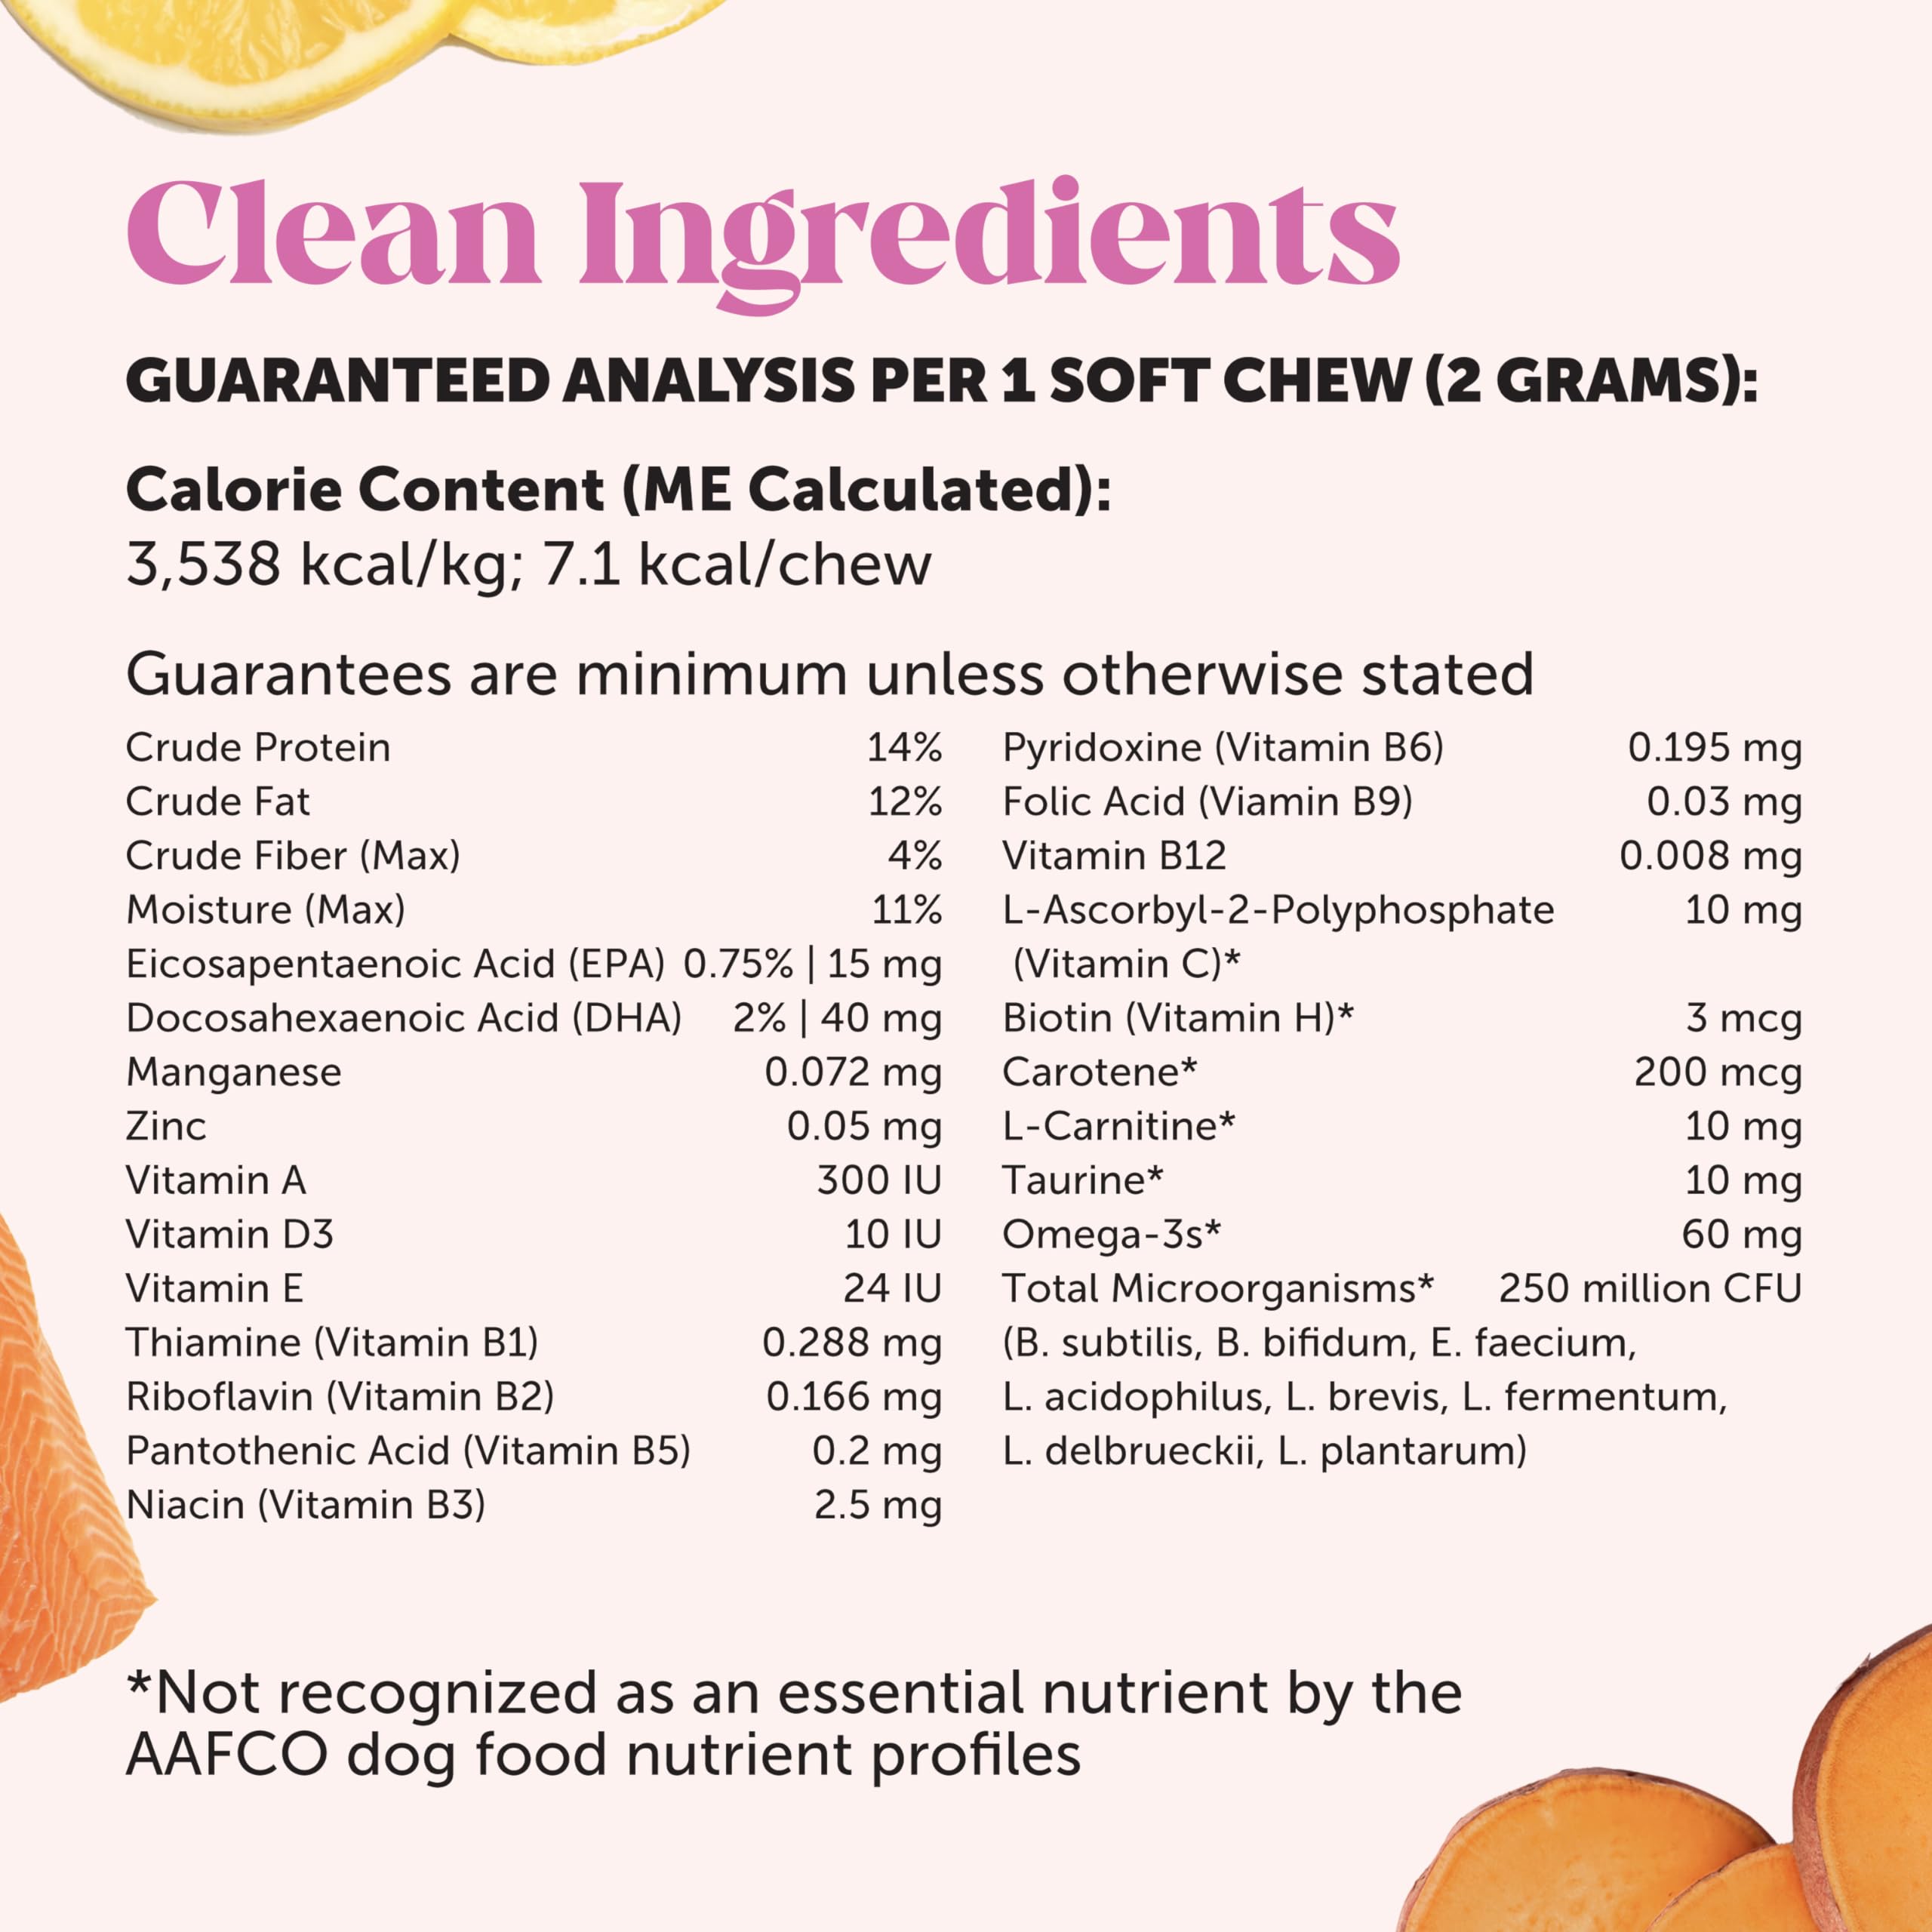 Pet Honesty Multivitamin Puppy Treats - Essential Dog Supplements & Vitamins for Learning and Cognitive Development- Probiotics, Omega Fish Oil for Health & Heart, Immune Health - Dog Health Supplies